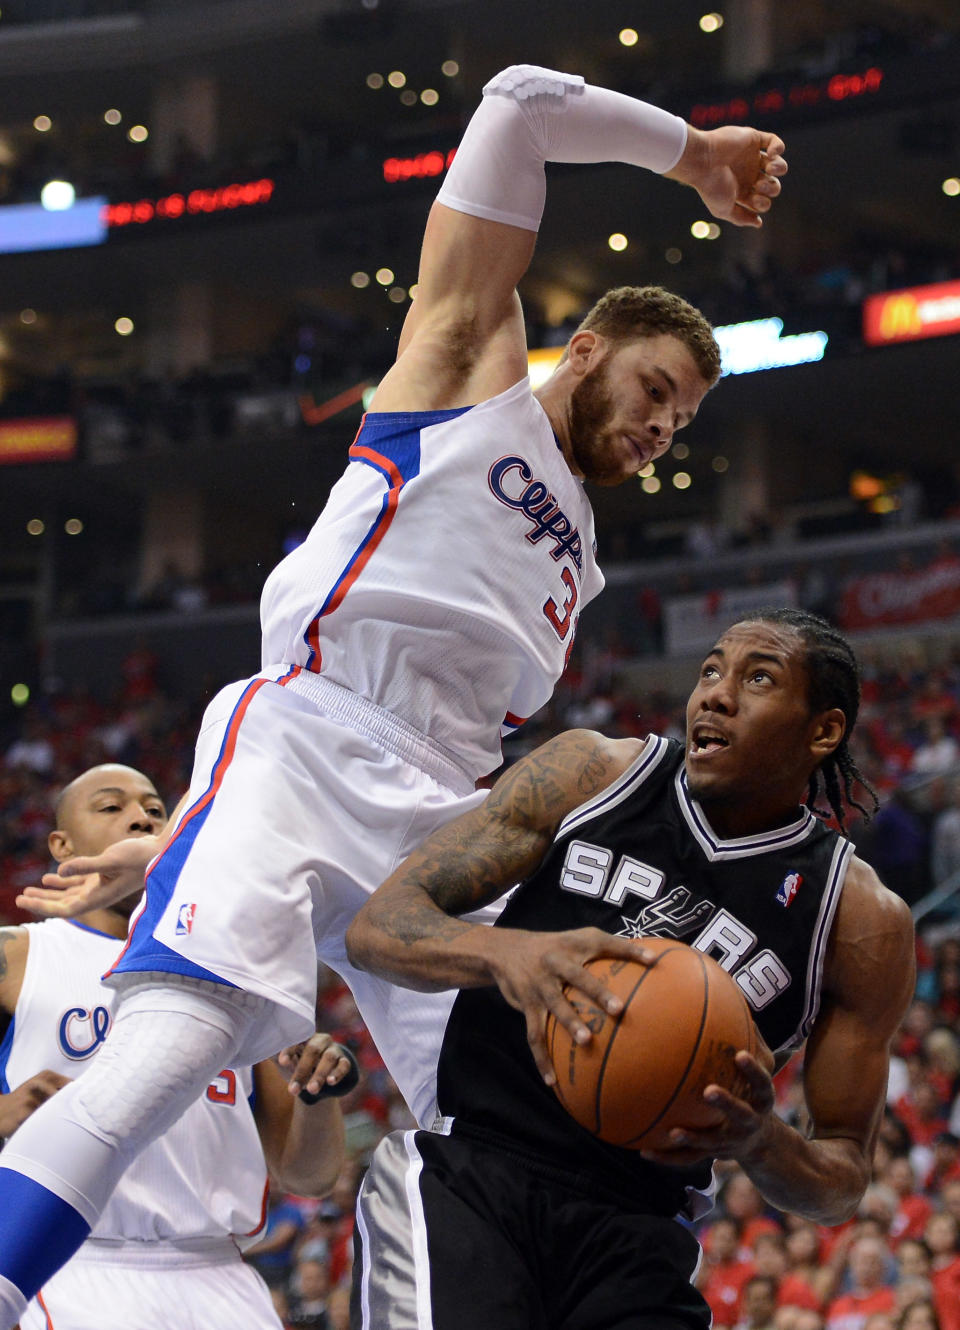 LOS ANGELES, CA - MAY 20: Kawhi Leonard #2 of the San Antonio Spurs looks to shoot against Blake Griffin #32 of the Los Angeles Clippers in the first quarter in Game Four of the Western Conference Semifinals in the 2012 NBA Playoffs on May 20, 2011 at Staples Center in Los Angeles, California. NOTE TO USER: User expressly acknowledges and agrees that, by downloading and or using this photograph, User is consenting to the terms and conditions of the Getty Images License Agreement. (Photo by Harry How/Getty Images)